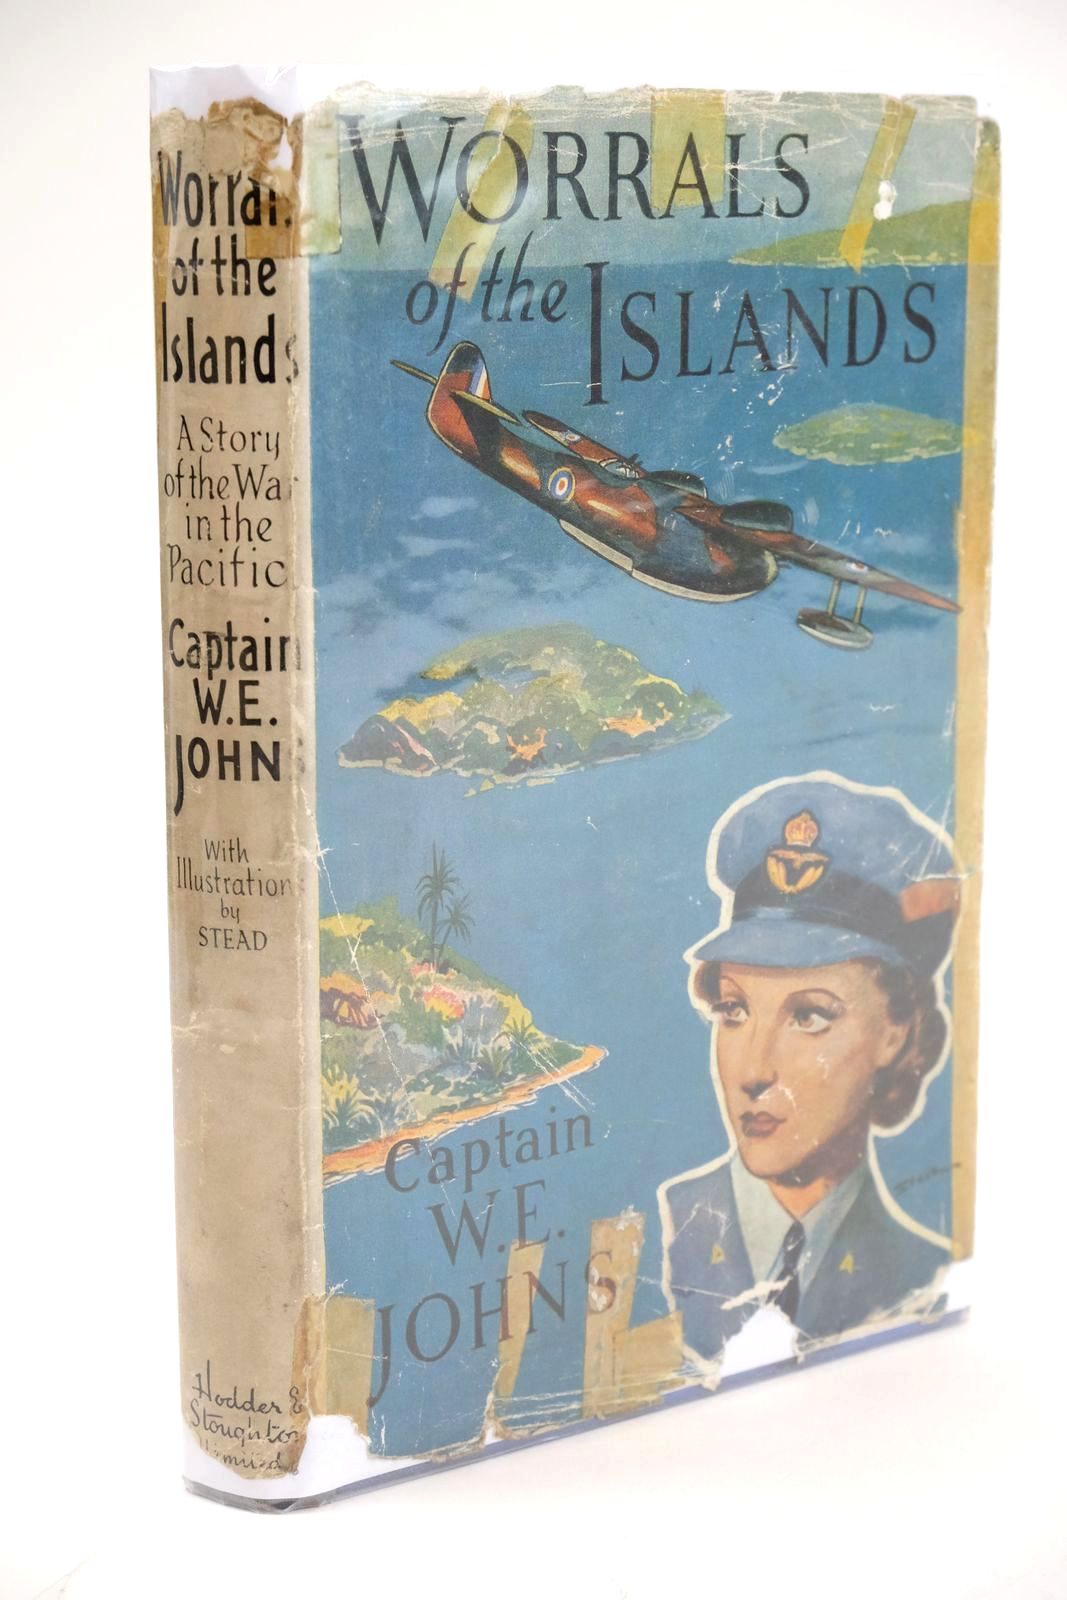 Photo of WORRALS OF THE ISLANDS written by Johns, W.E. illustrated by Stead,  published by Hodder & Stoughton (STOCK CODE: 1324493)  for sale by Stella & Rose's Books